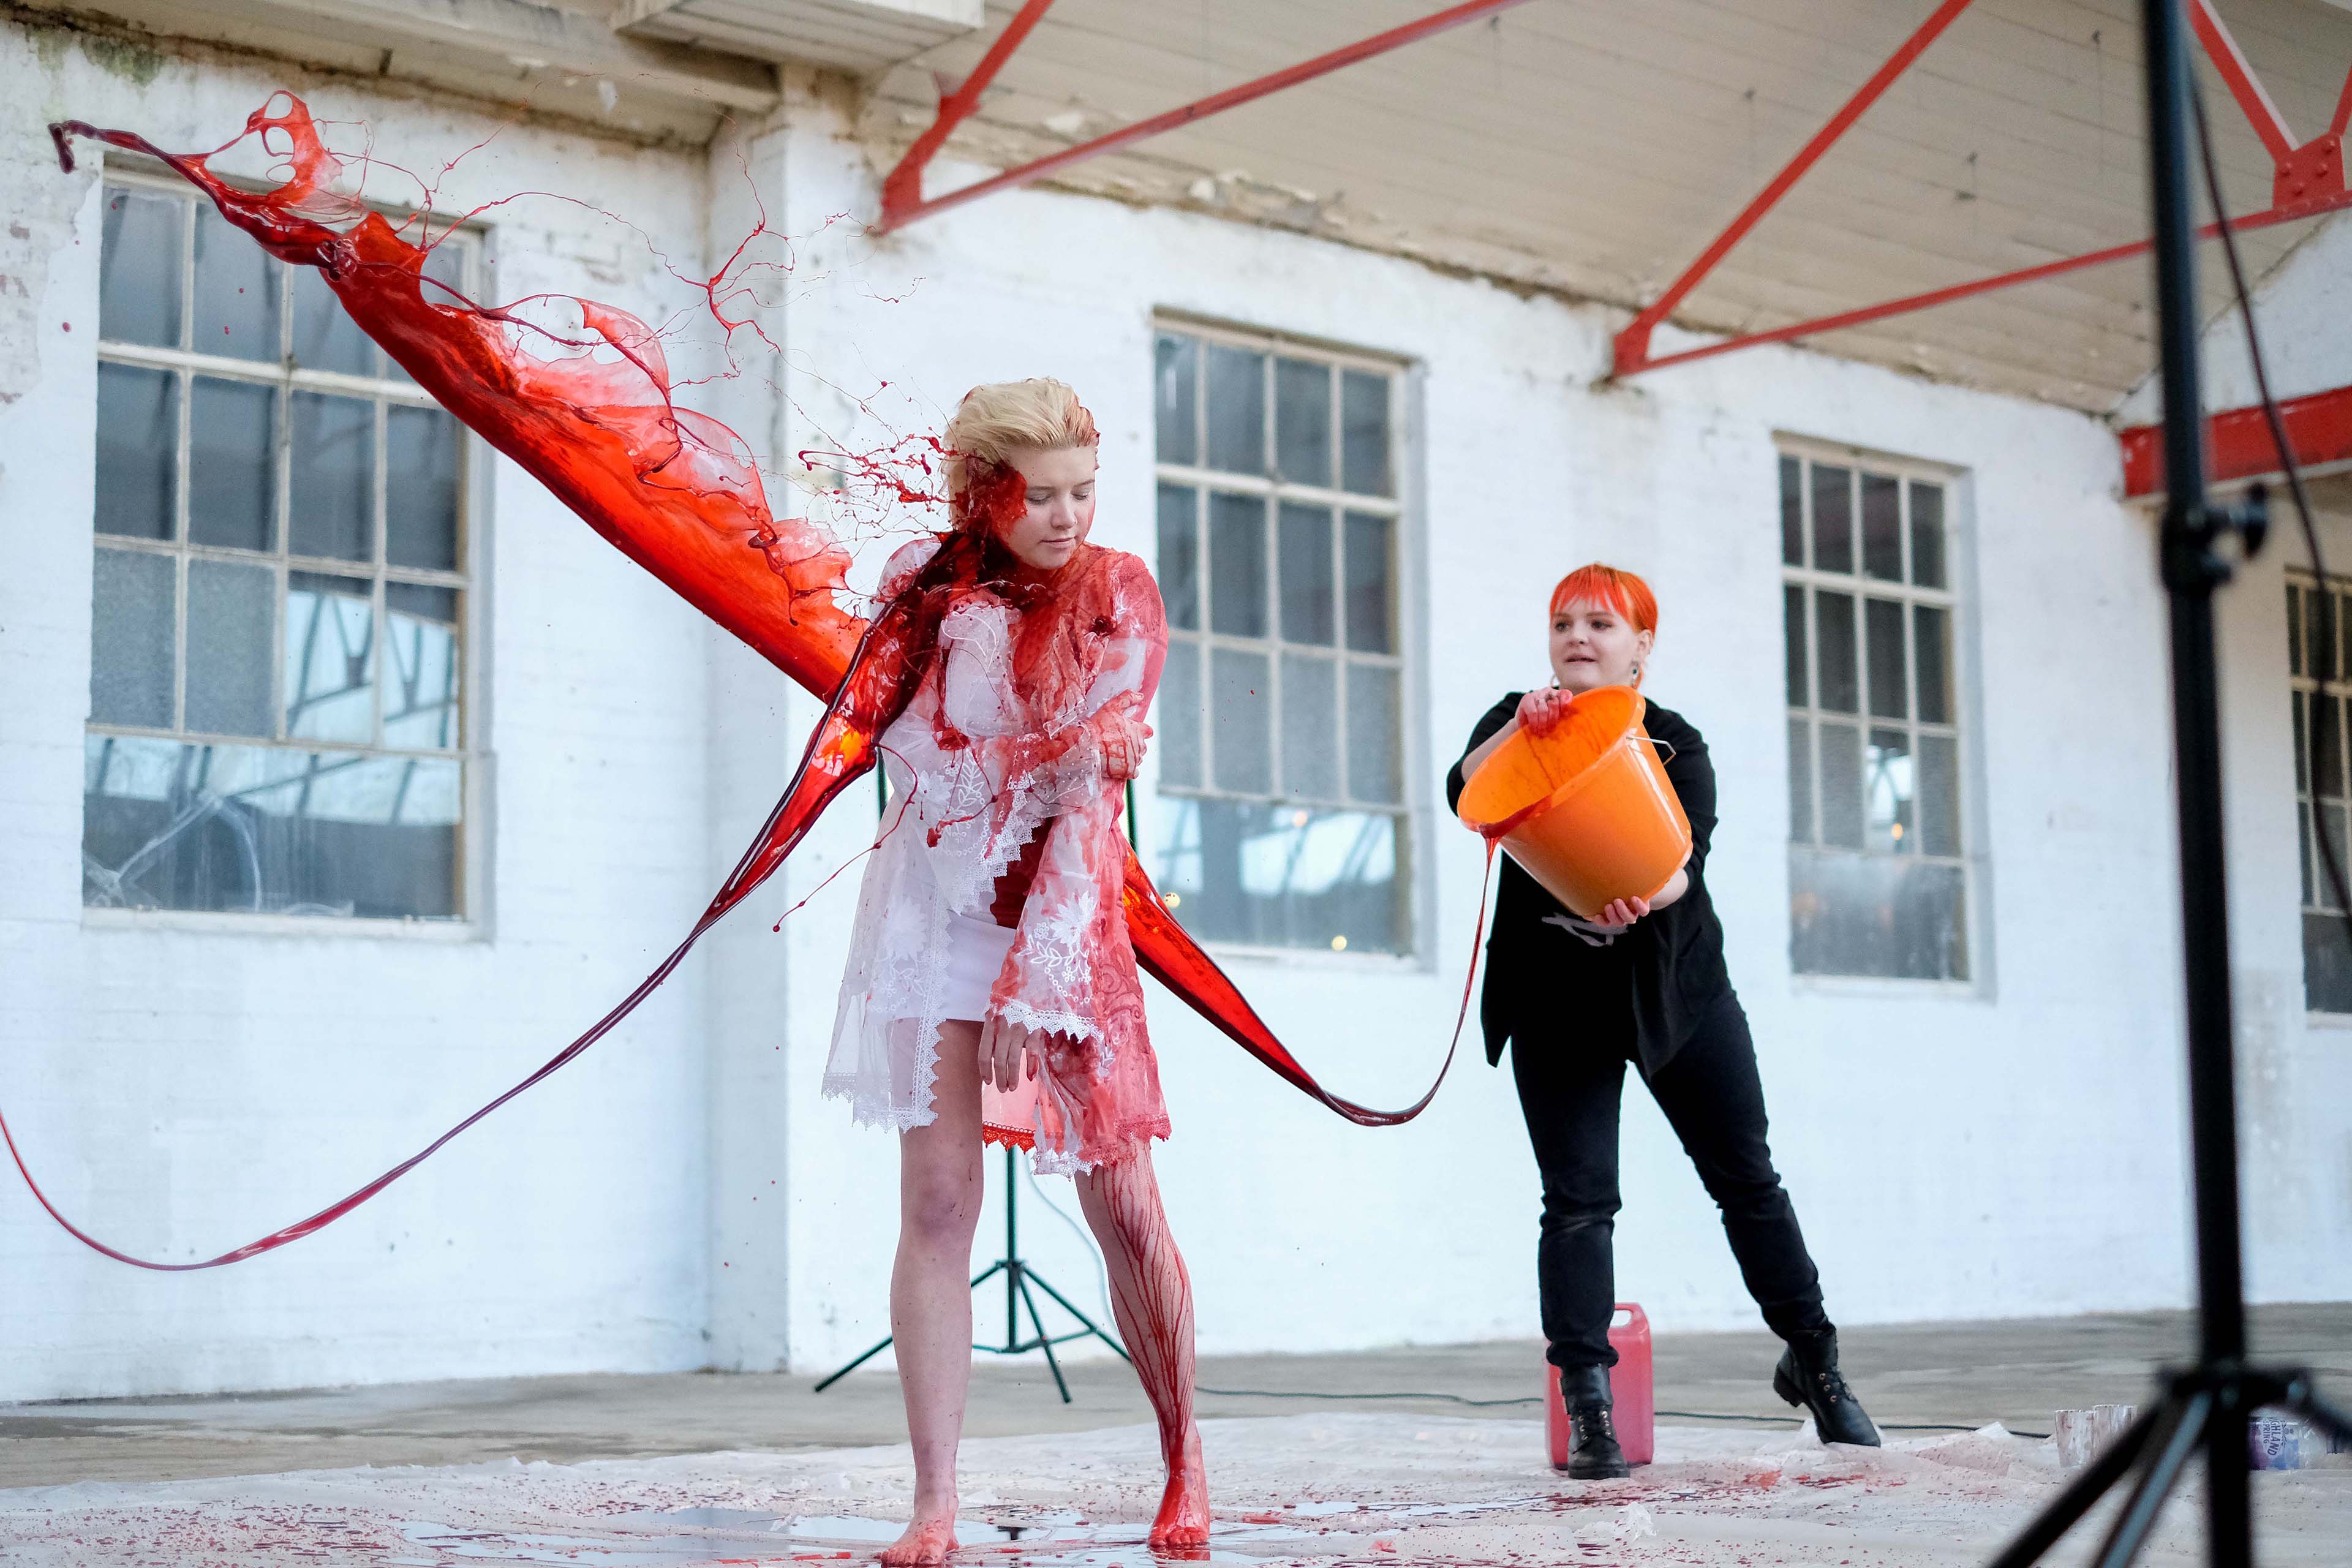 Behind the scenes - pouring stage blood on model